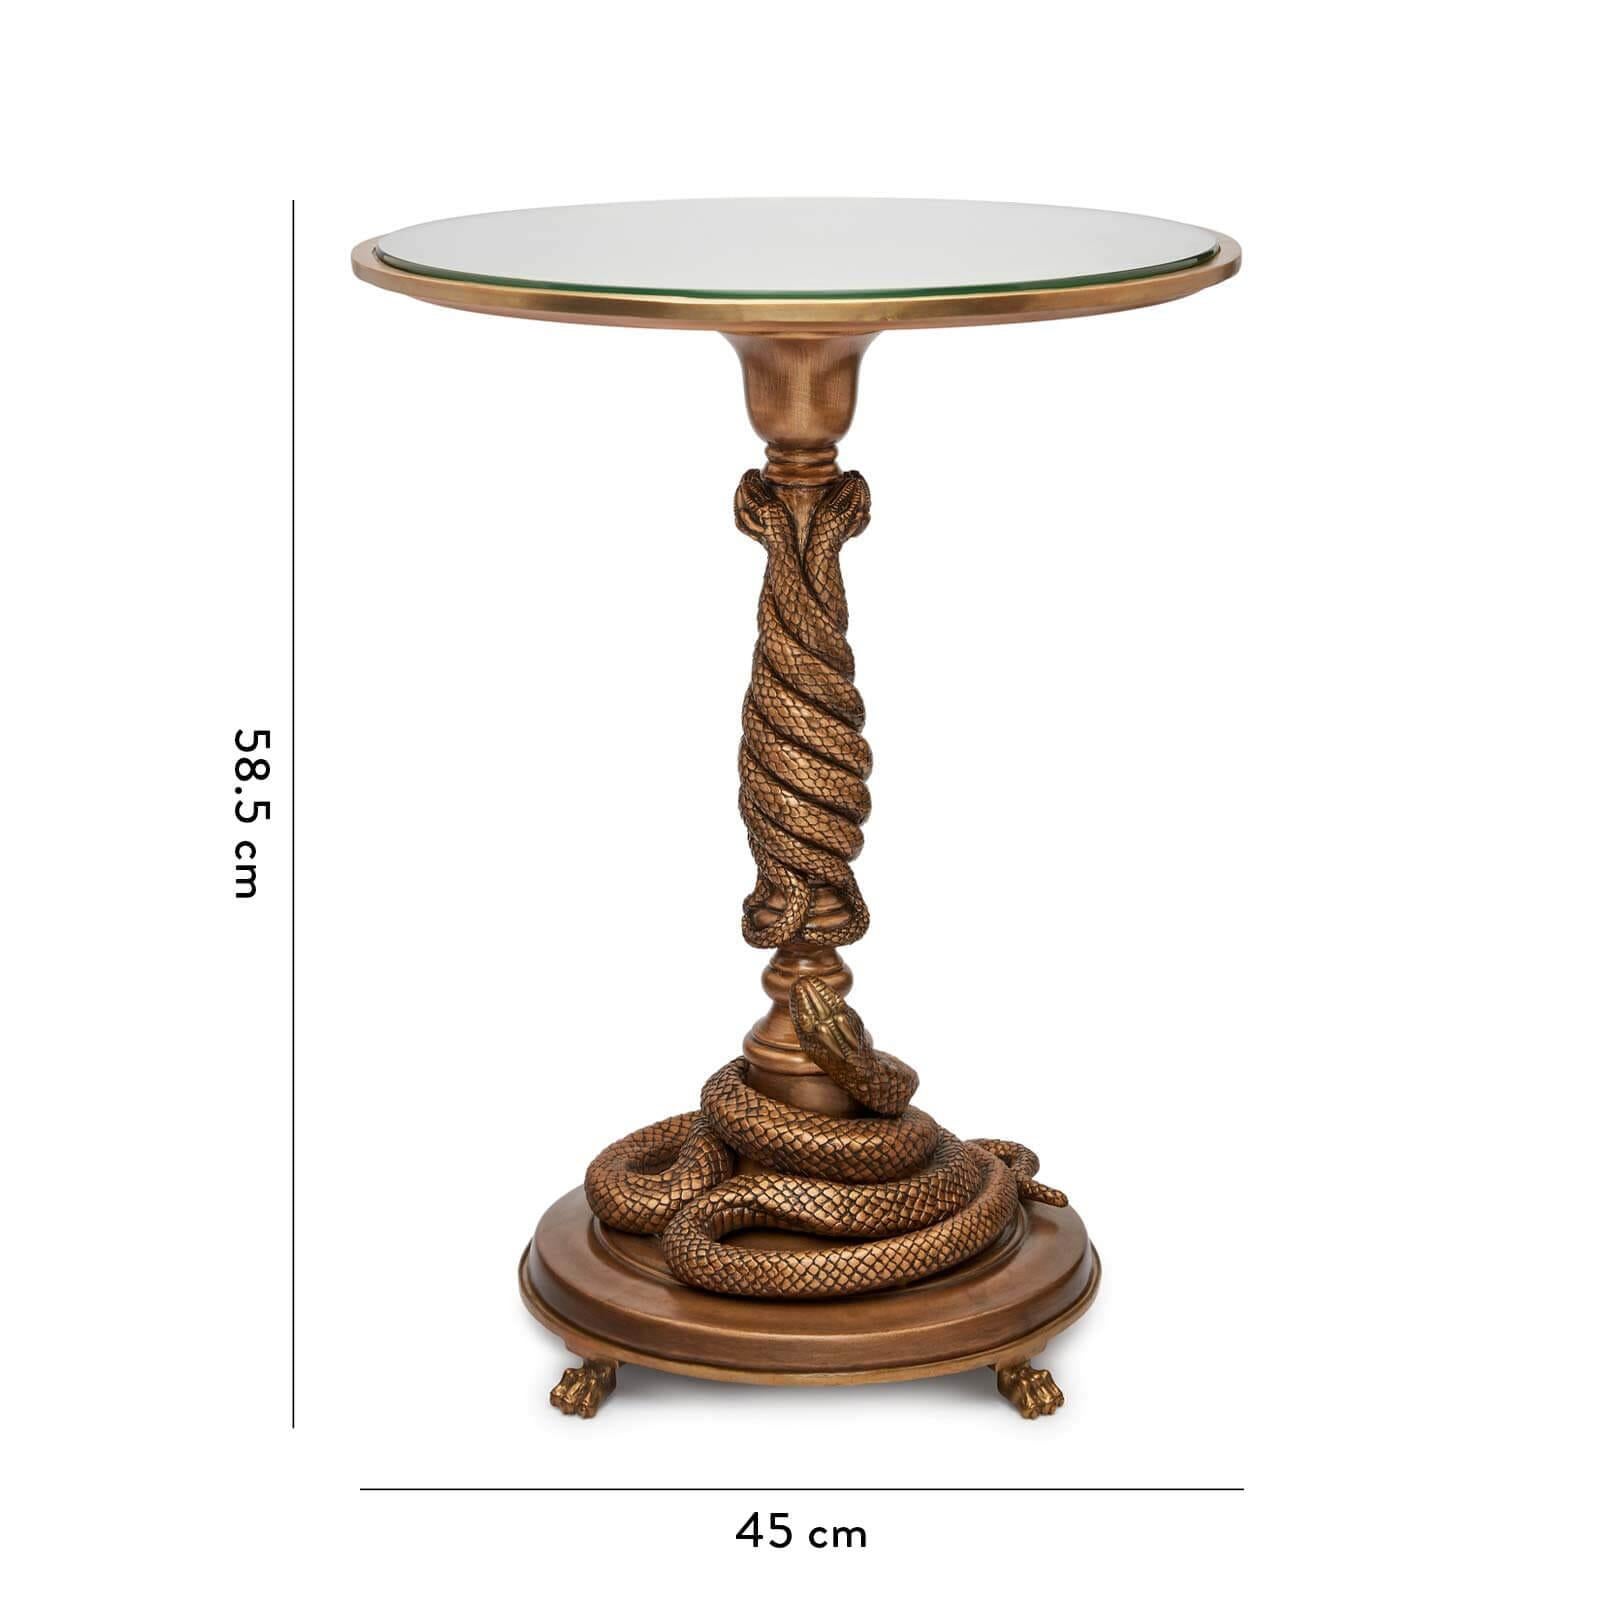 Table d'appoint SERPENTIS - Laiton Neuf - En vente à New York, NY